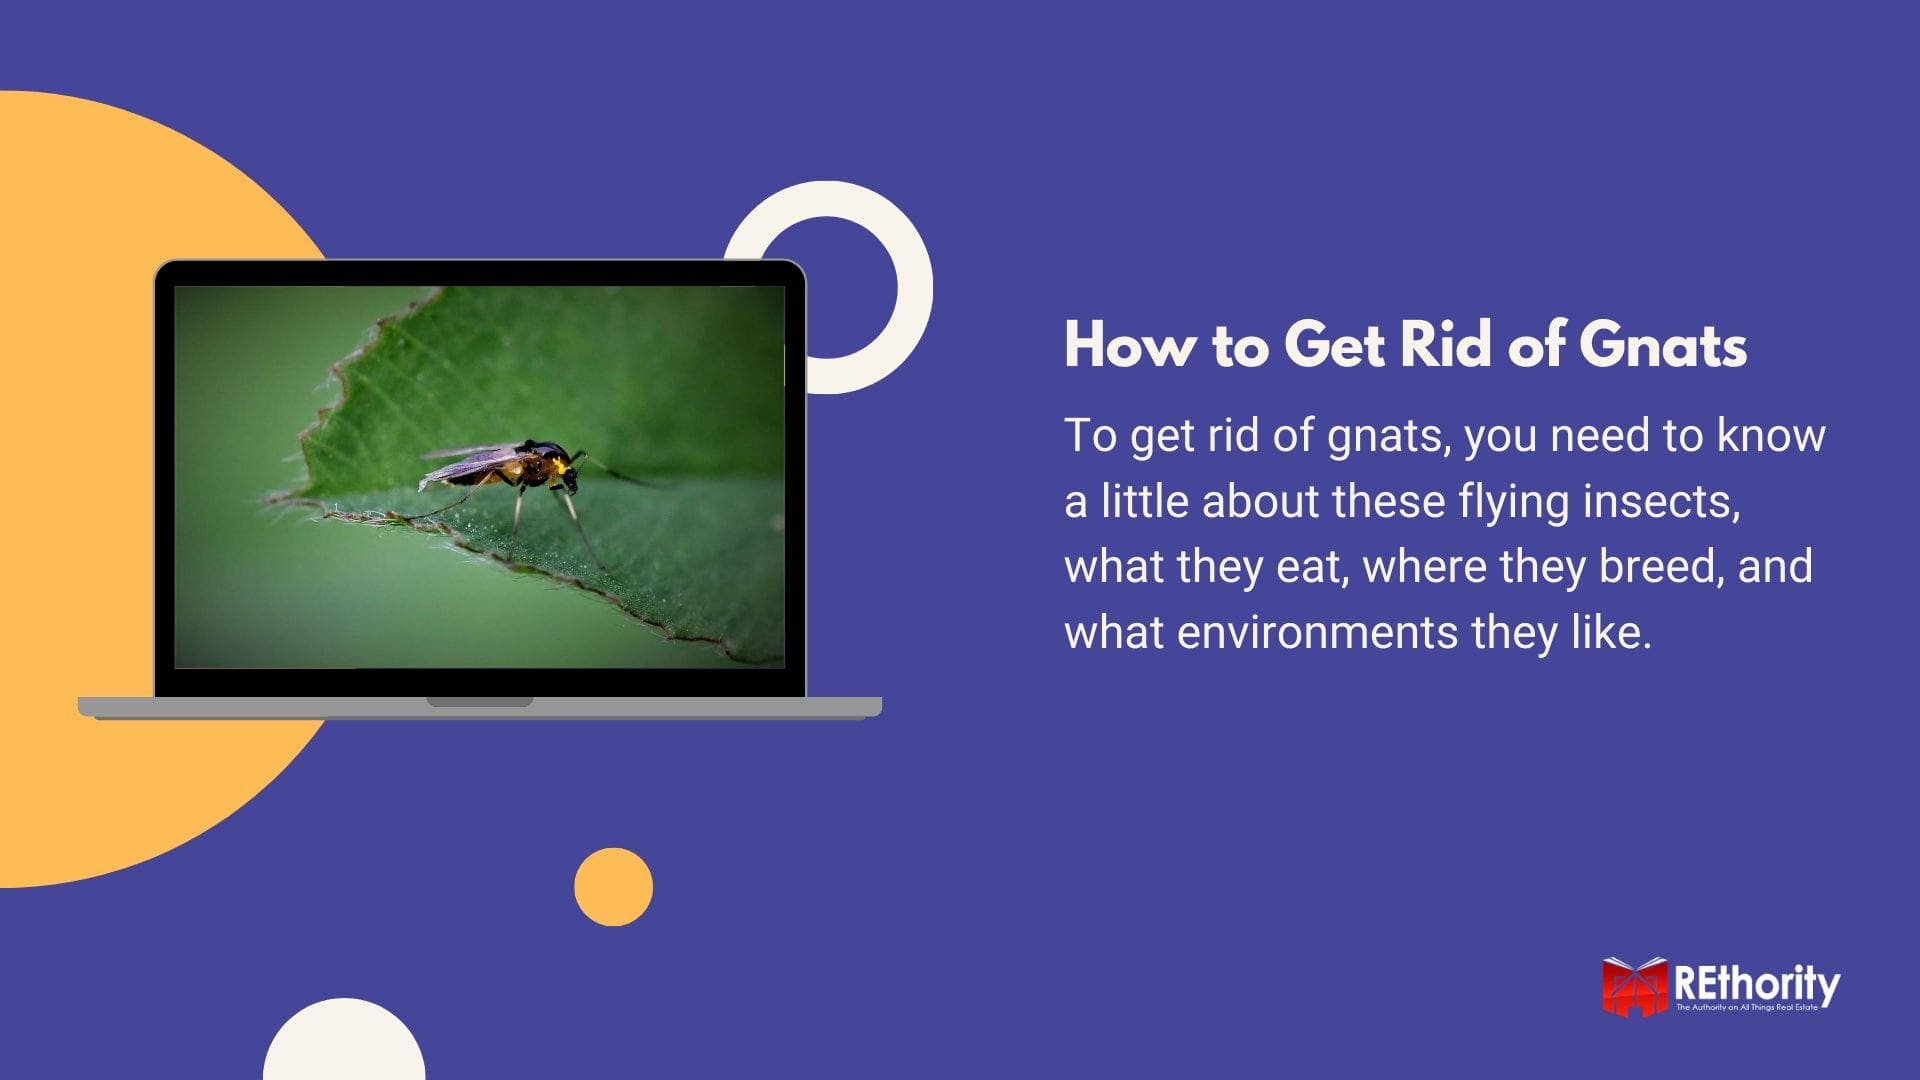 How to Get Rid of Gnats graphic featuring a small insect sitting on a green leaf displayed on a computer screen